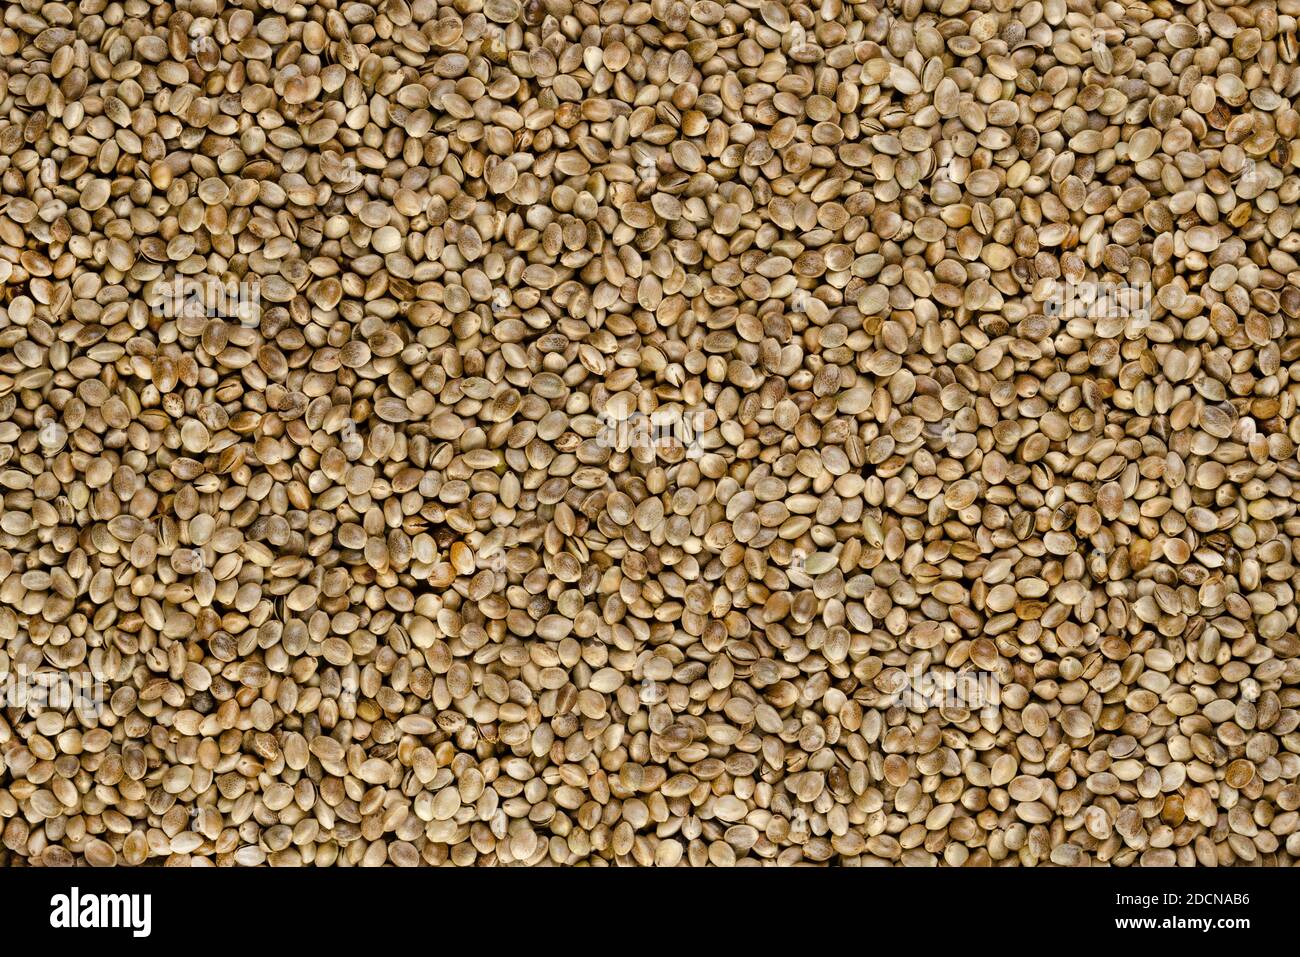 Whole hemp seeds. Surface and background with raw fruits of Cannabis sativa, high in complete protein and a great source of iron. Macro food photo. Stock Photo